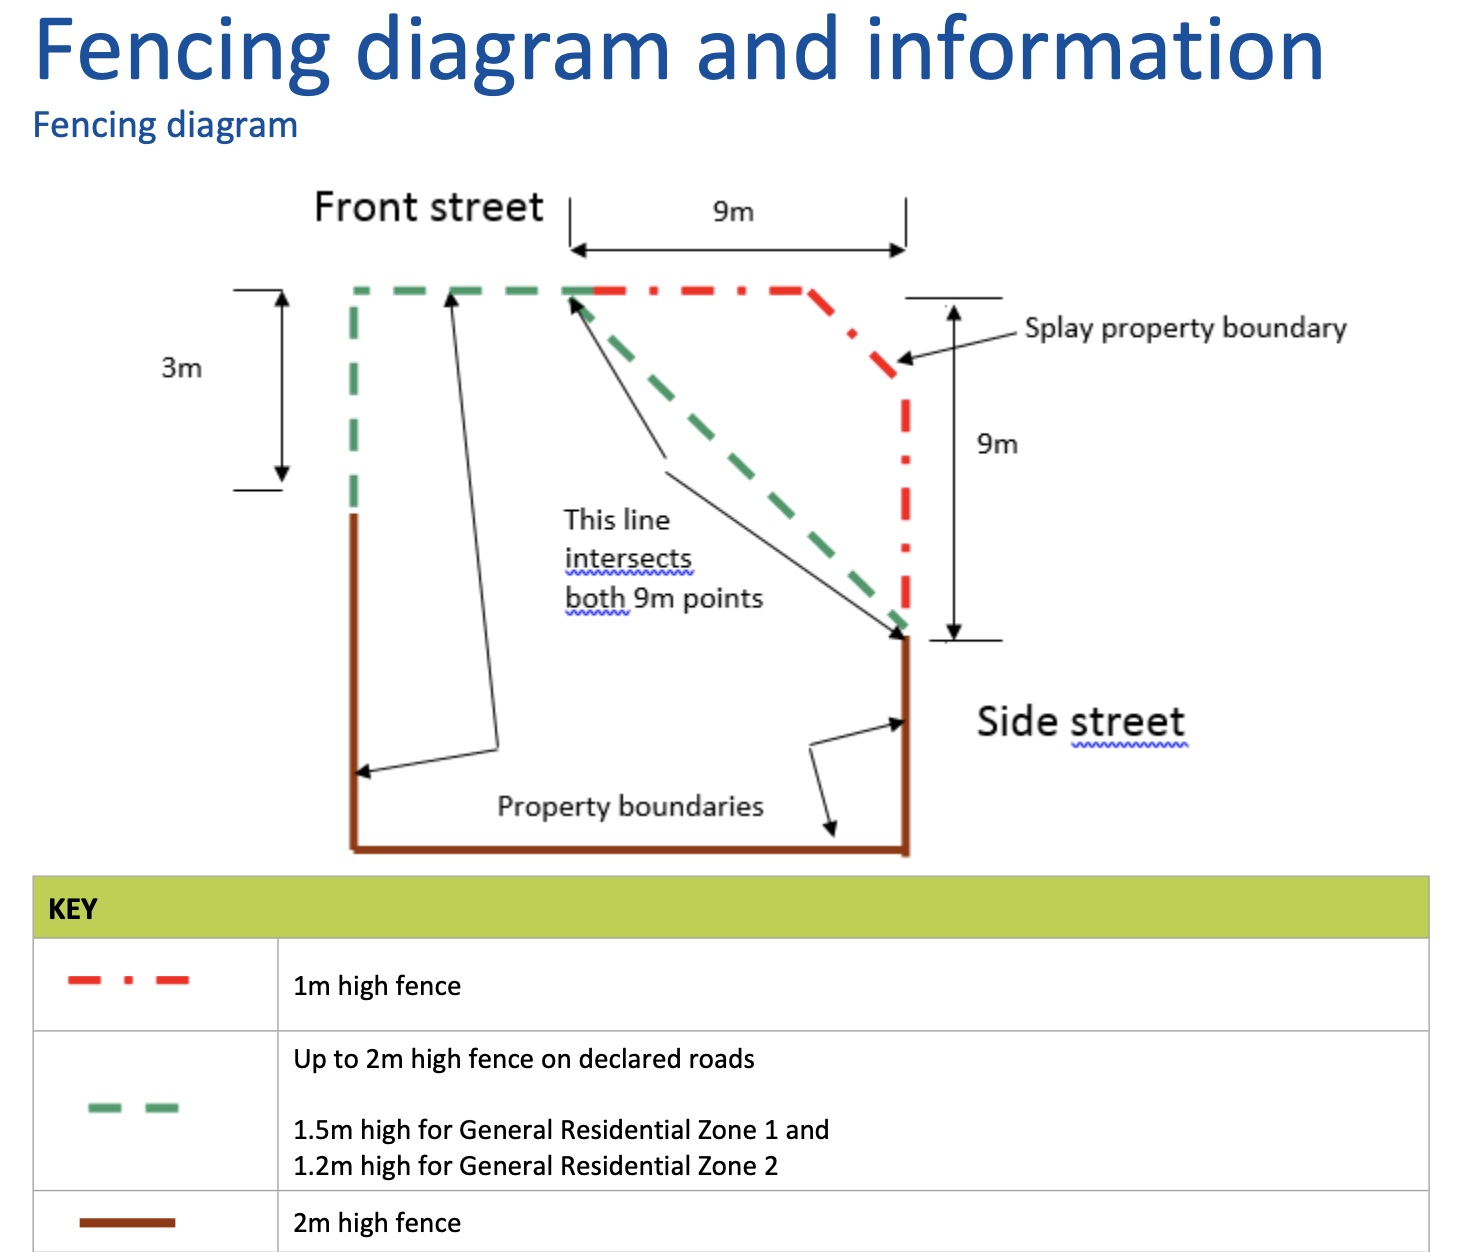 Fencing diagram and information